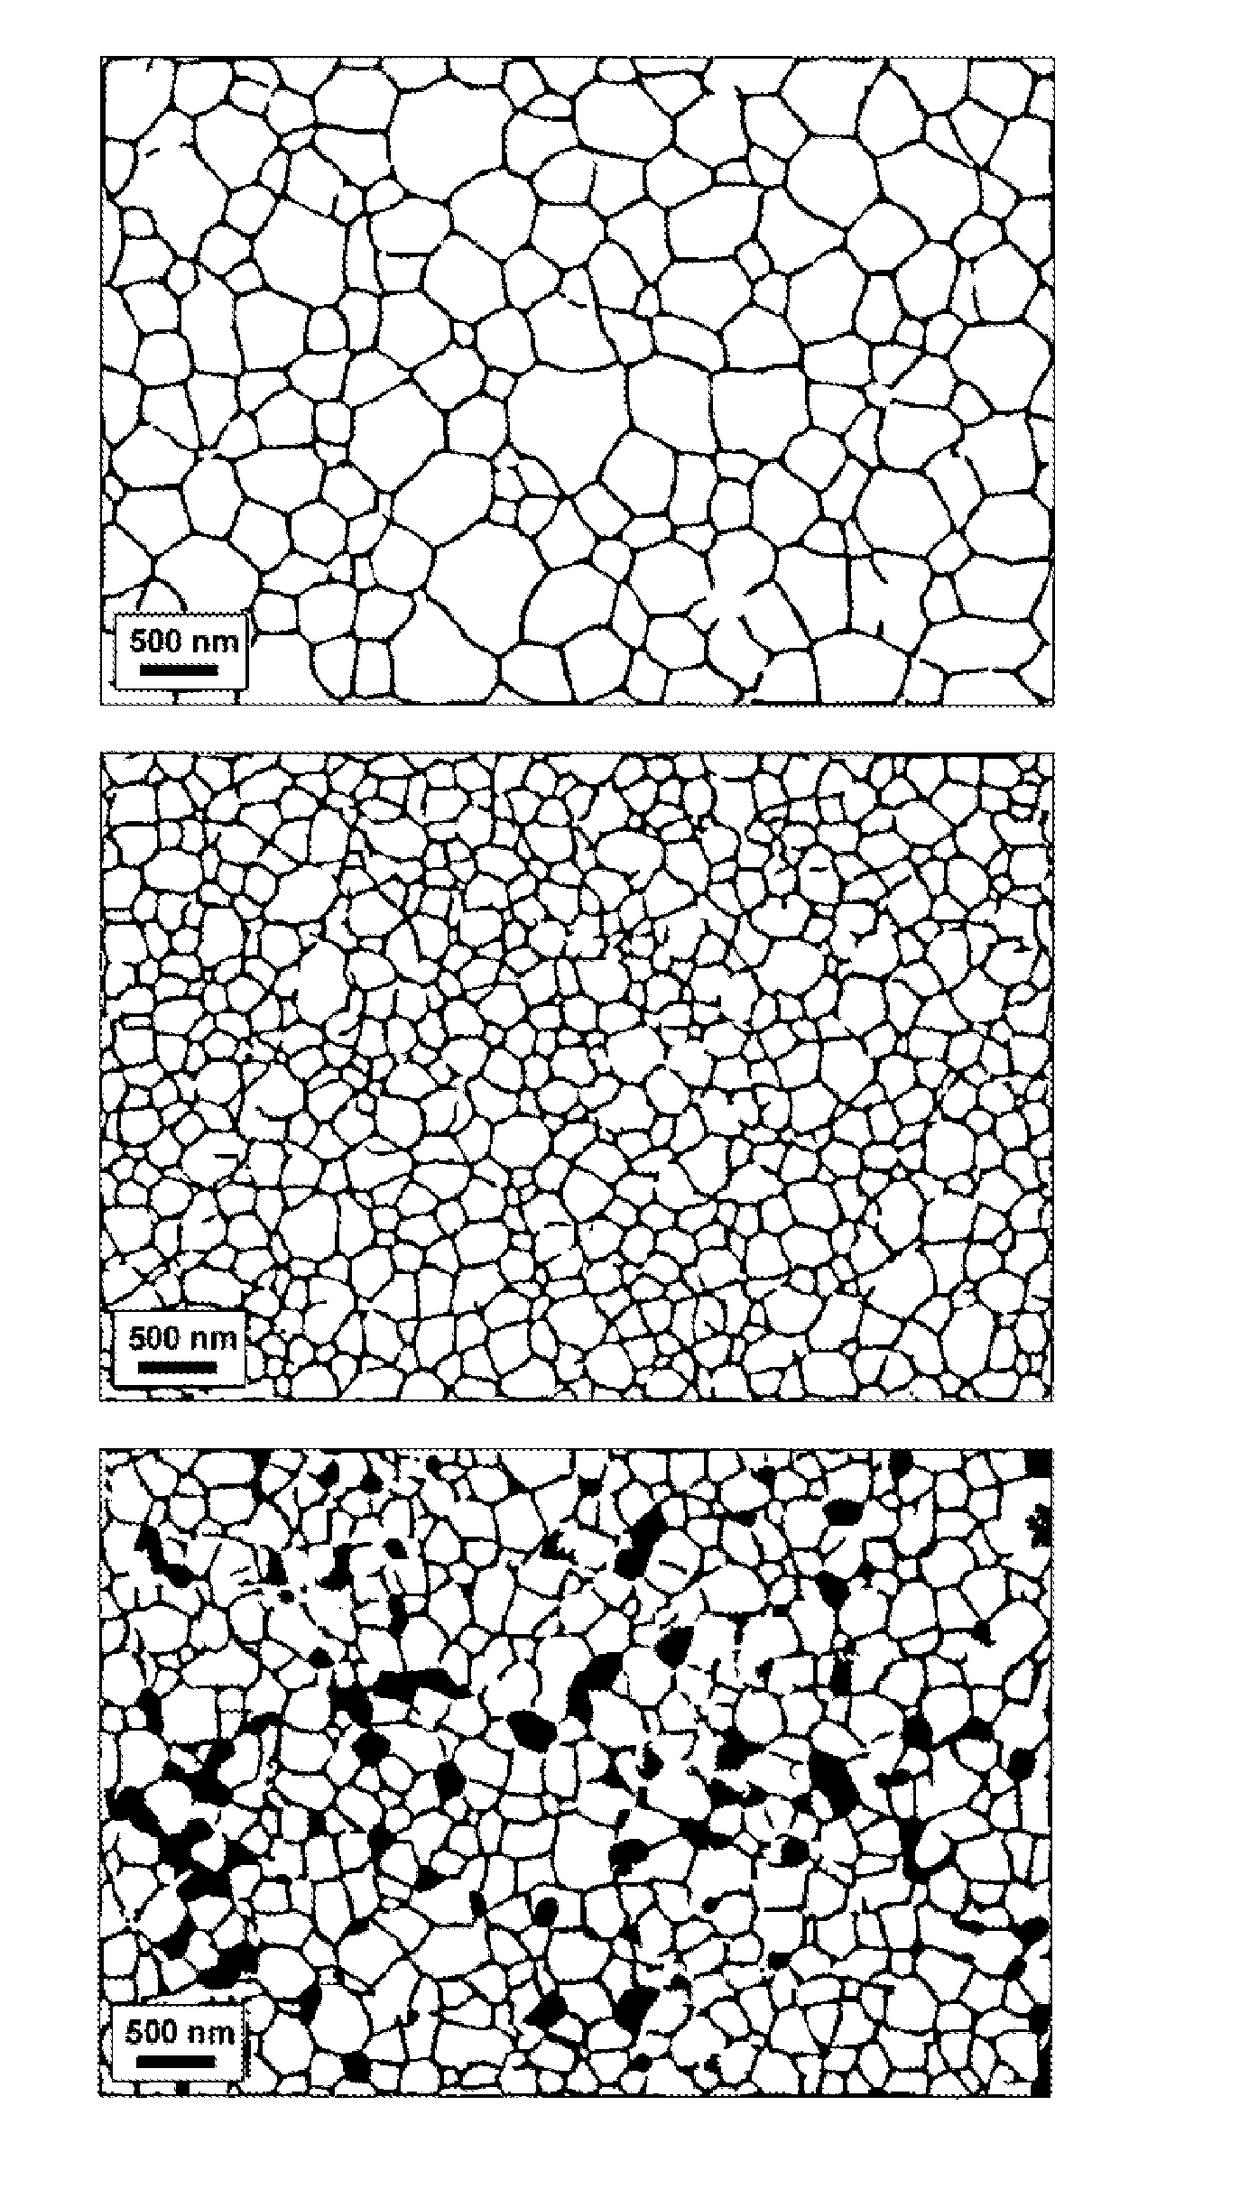 Shaped sintered ceramic bodies composed of Y2O3-stabilized zirconium oxide and process for producing a shaped sintered ceramic body composed of Y2O3-stabilized zirconium oxide